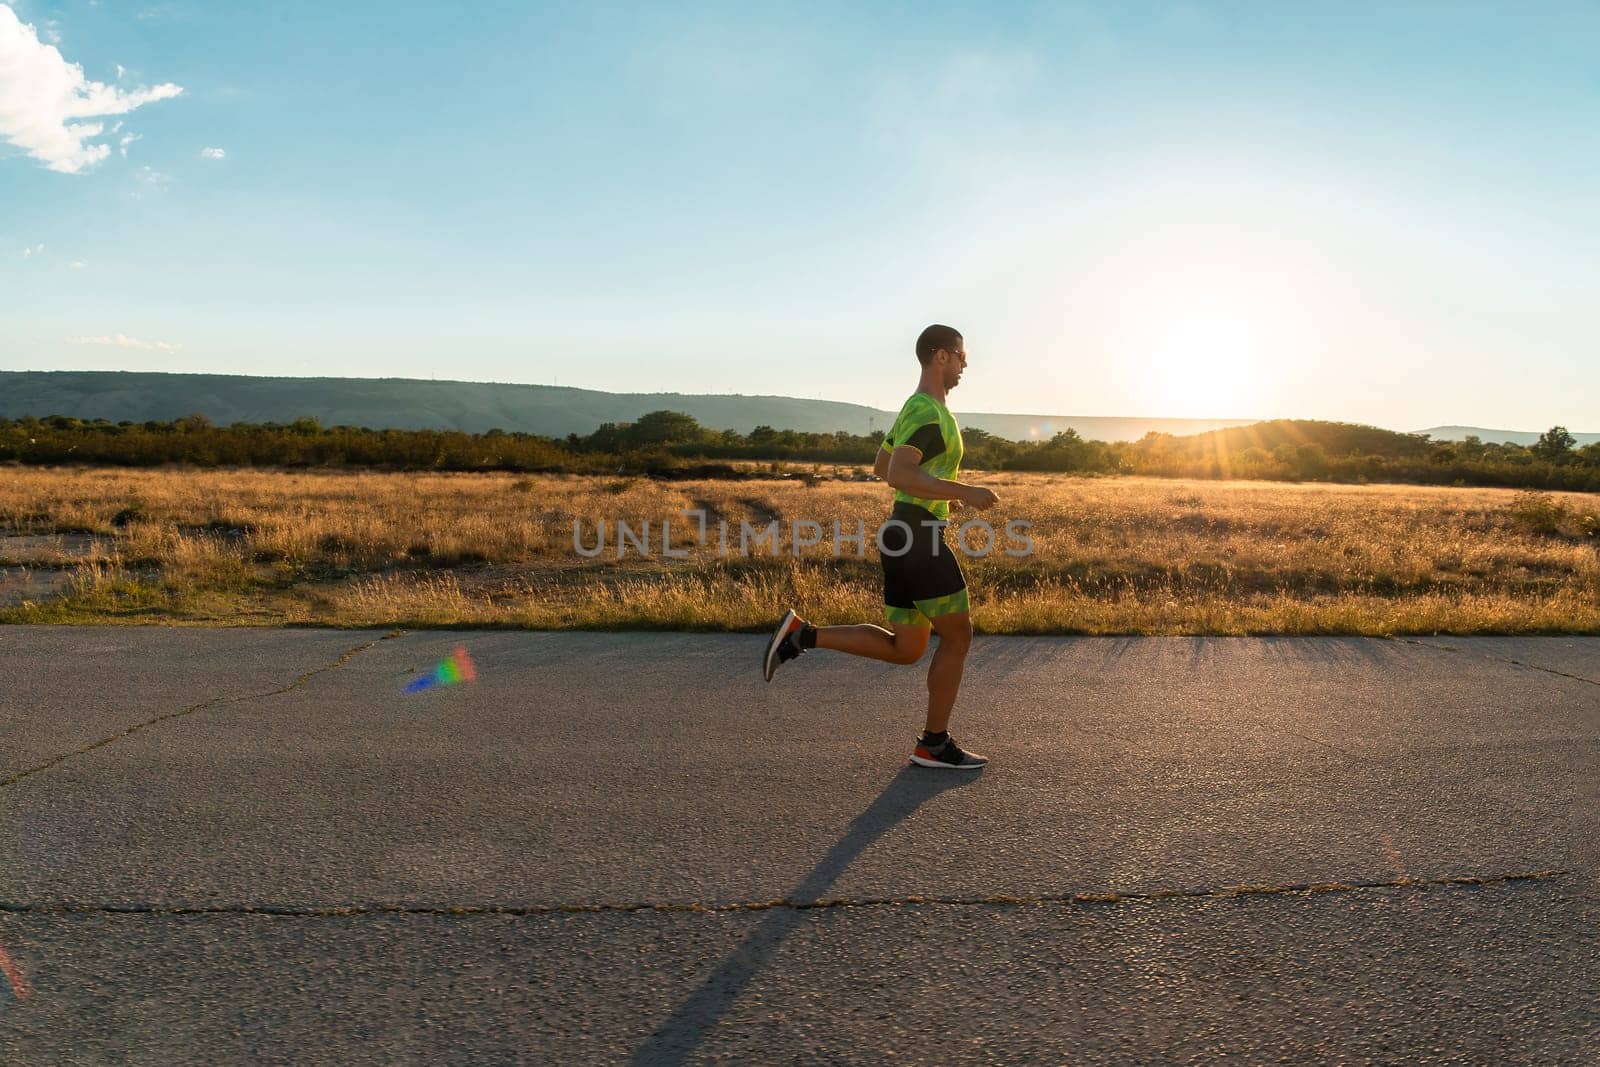 Triathlete in professional gear running early in the morning, preparing for a marathon, dedication to sport and readiness to take on the challenges of a marathon